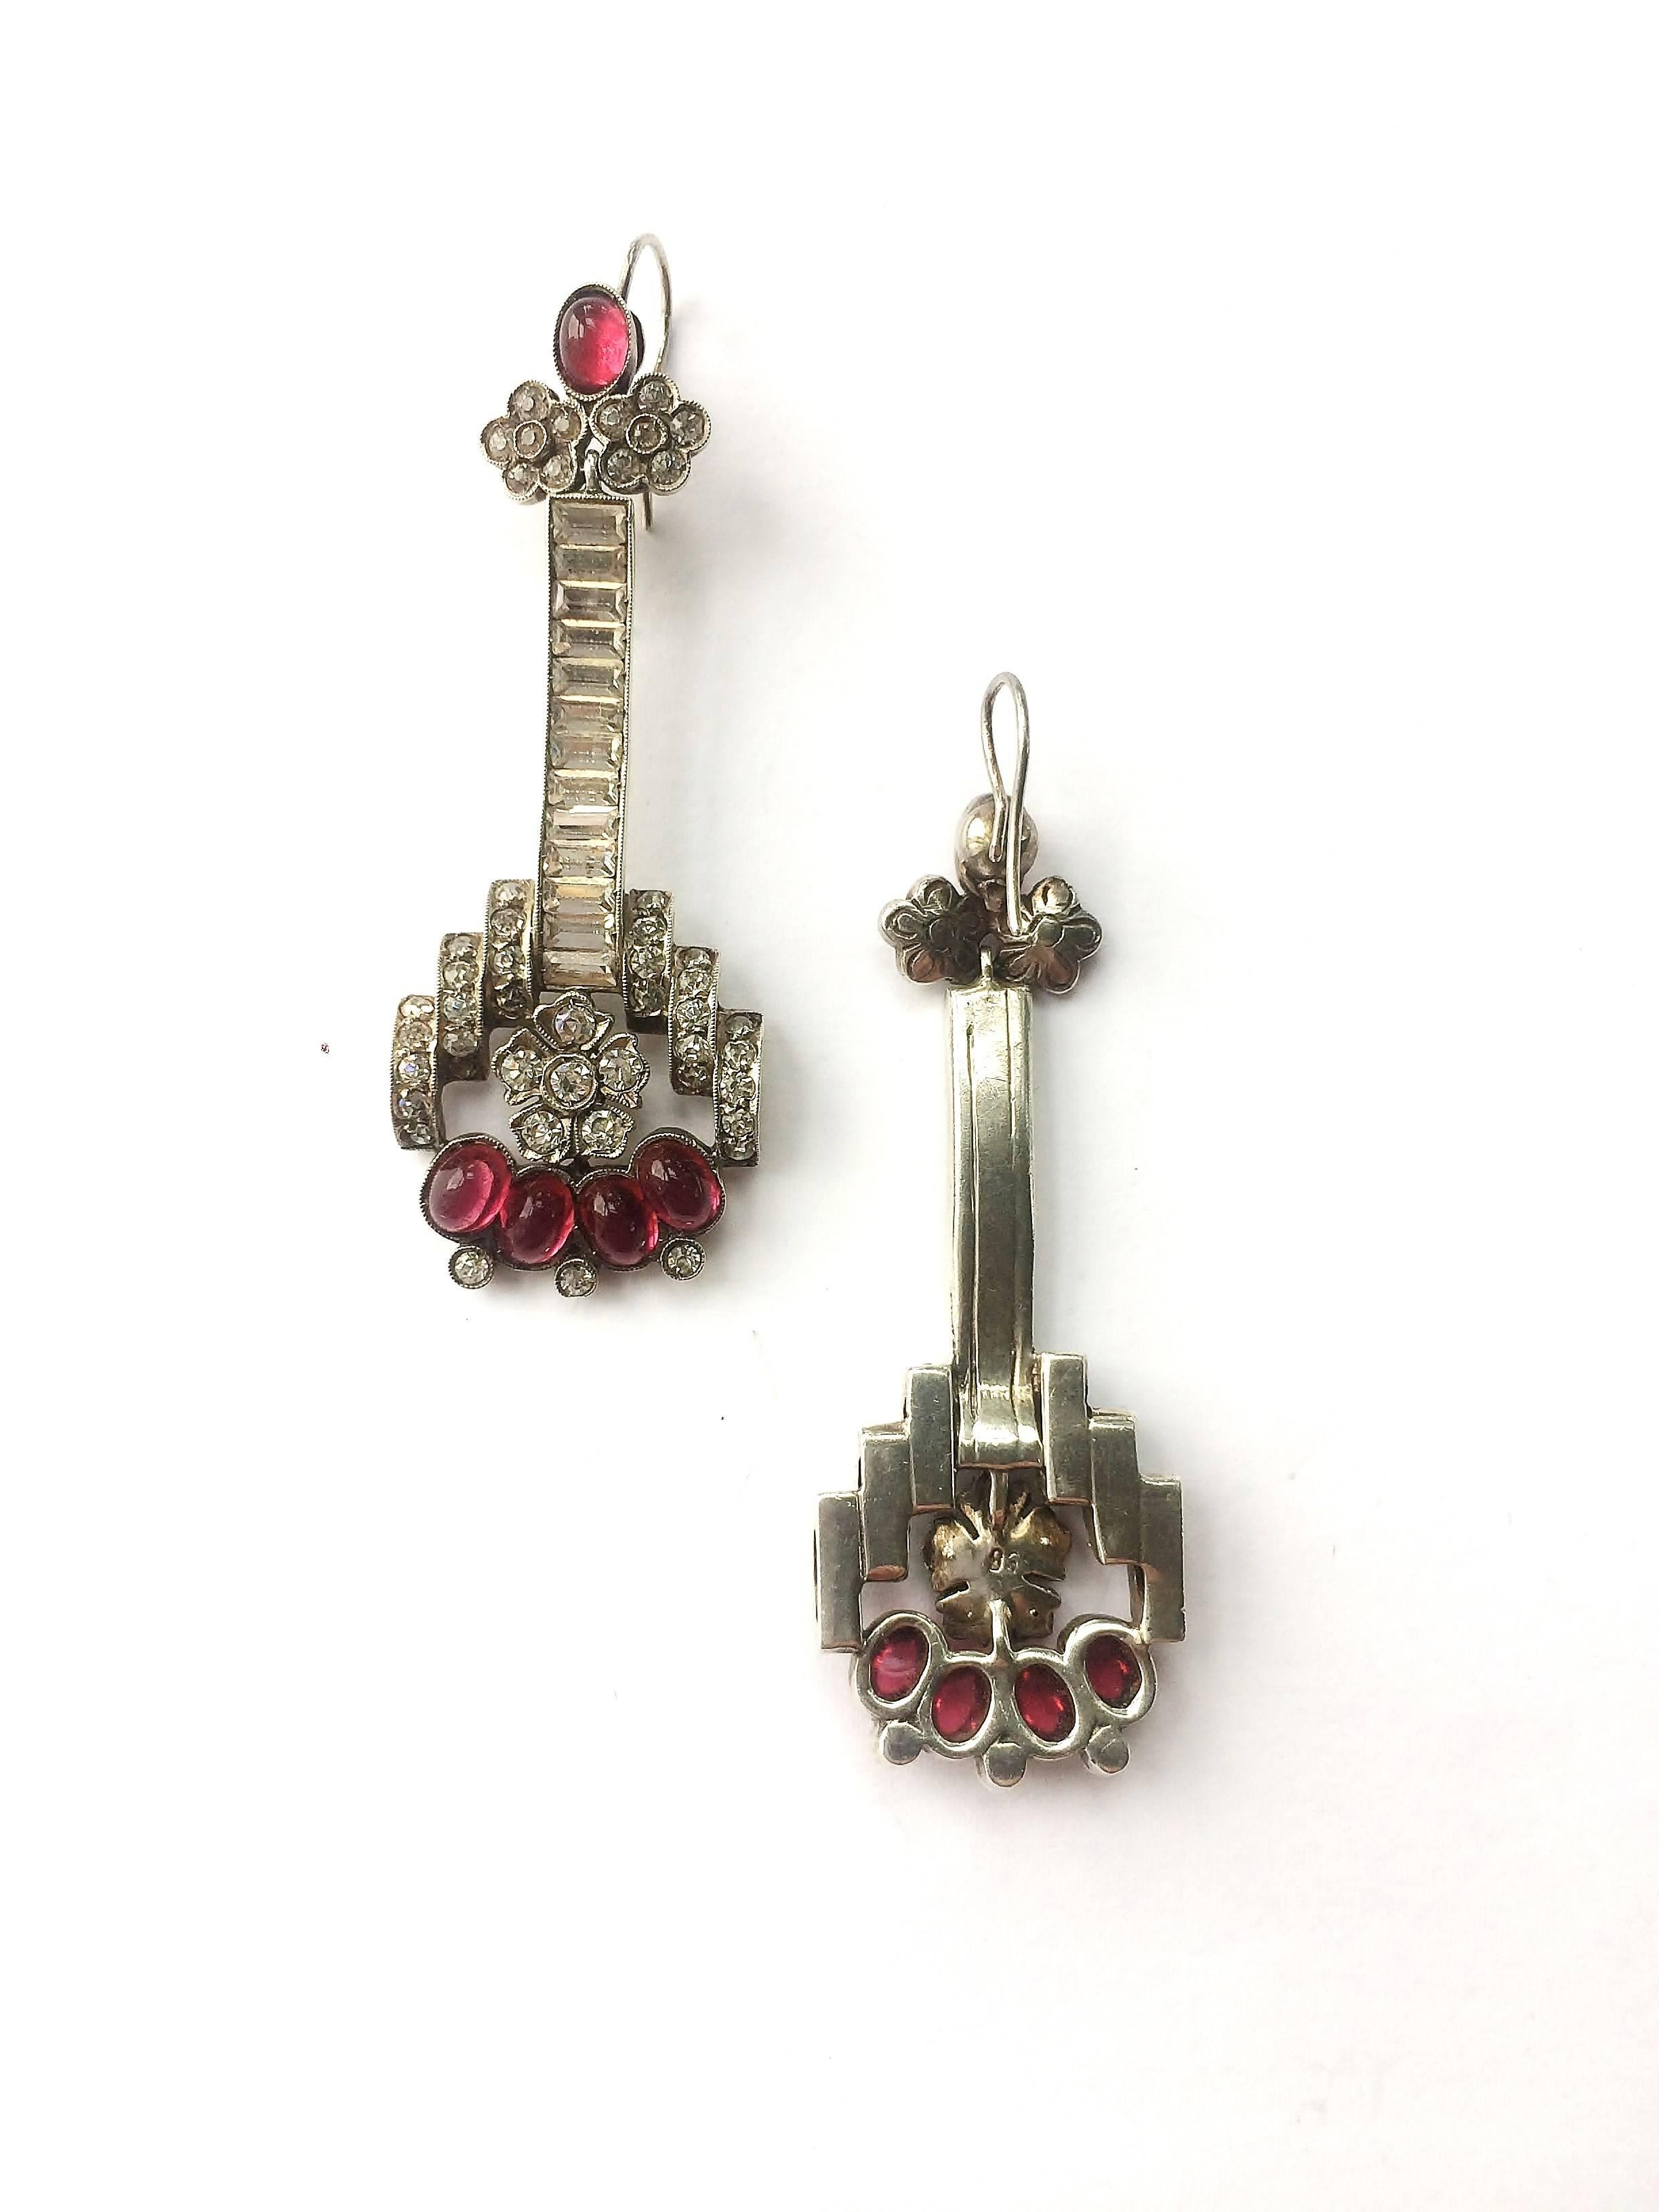 Exquisite and highly stylised sterling silver and clear paste drop earrings, with ruby cabuchons, with a silver hook fitting for pierced ears, from the 1930s. They are stamped '935'.
A simple piece with pave set clear paste baguettes make the large